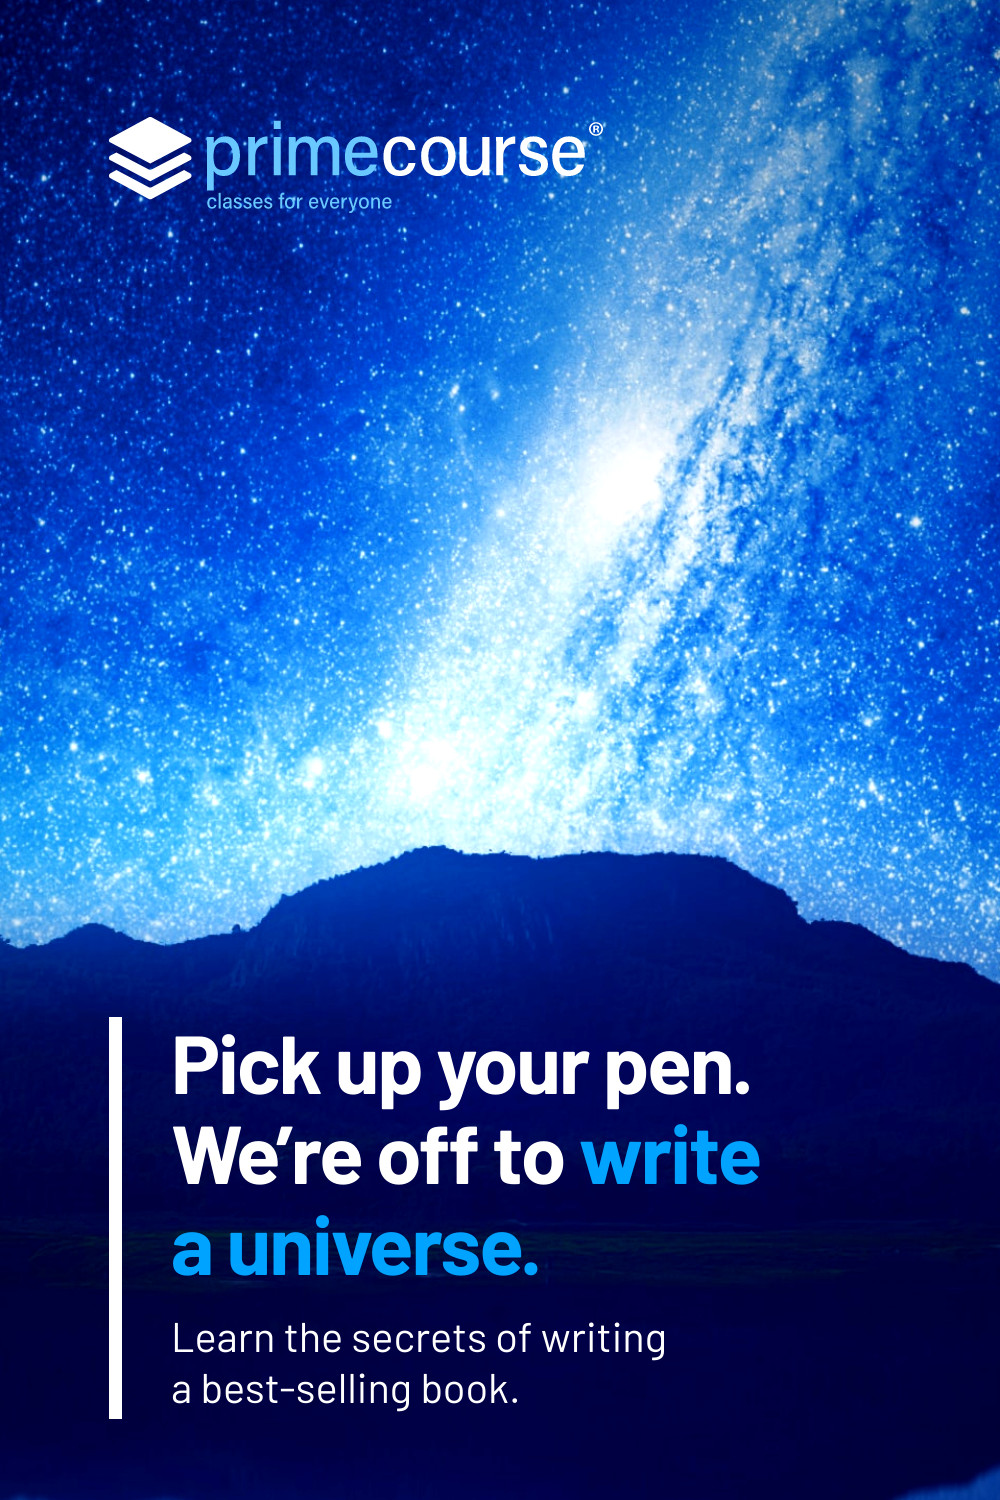 Pick Up Your Pen